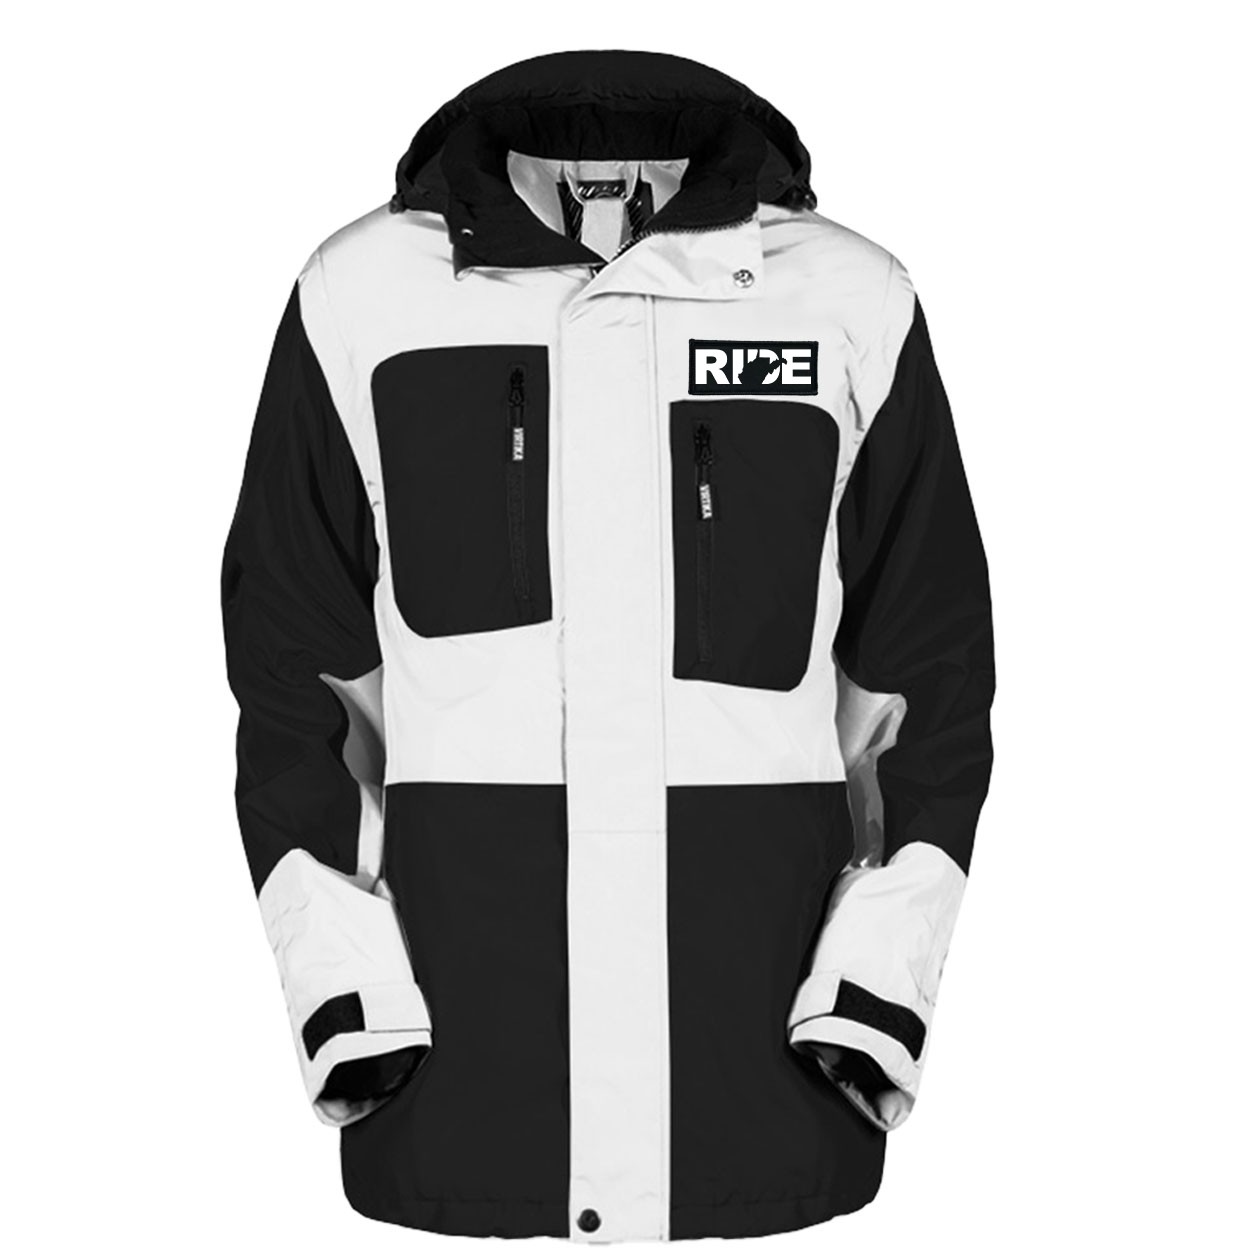 Ride West Virginia Classic Woven Patch Pro Snowboard Jacket (Black/White)